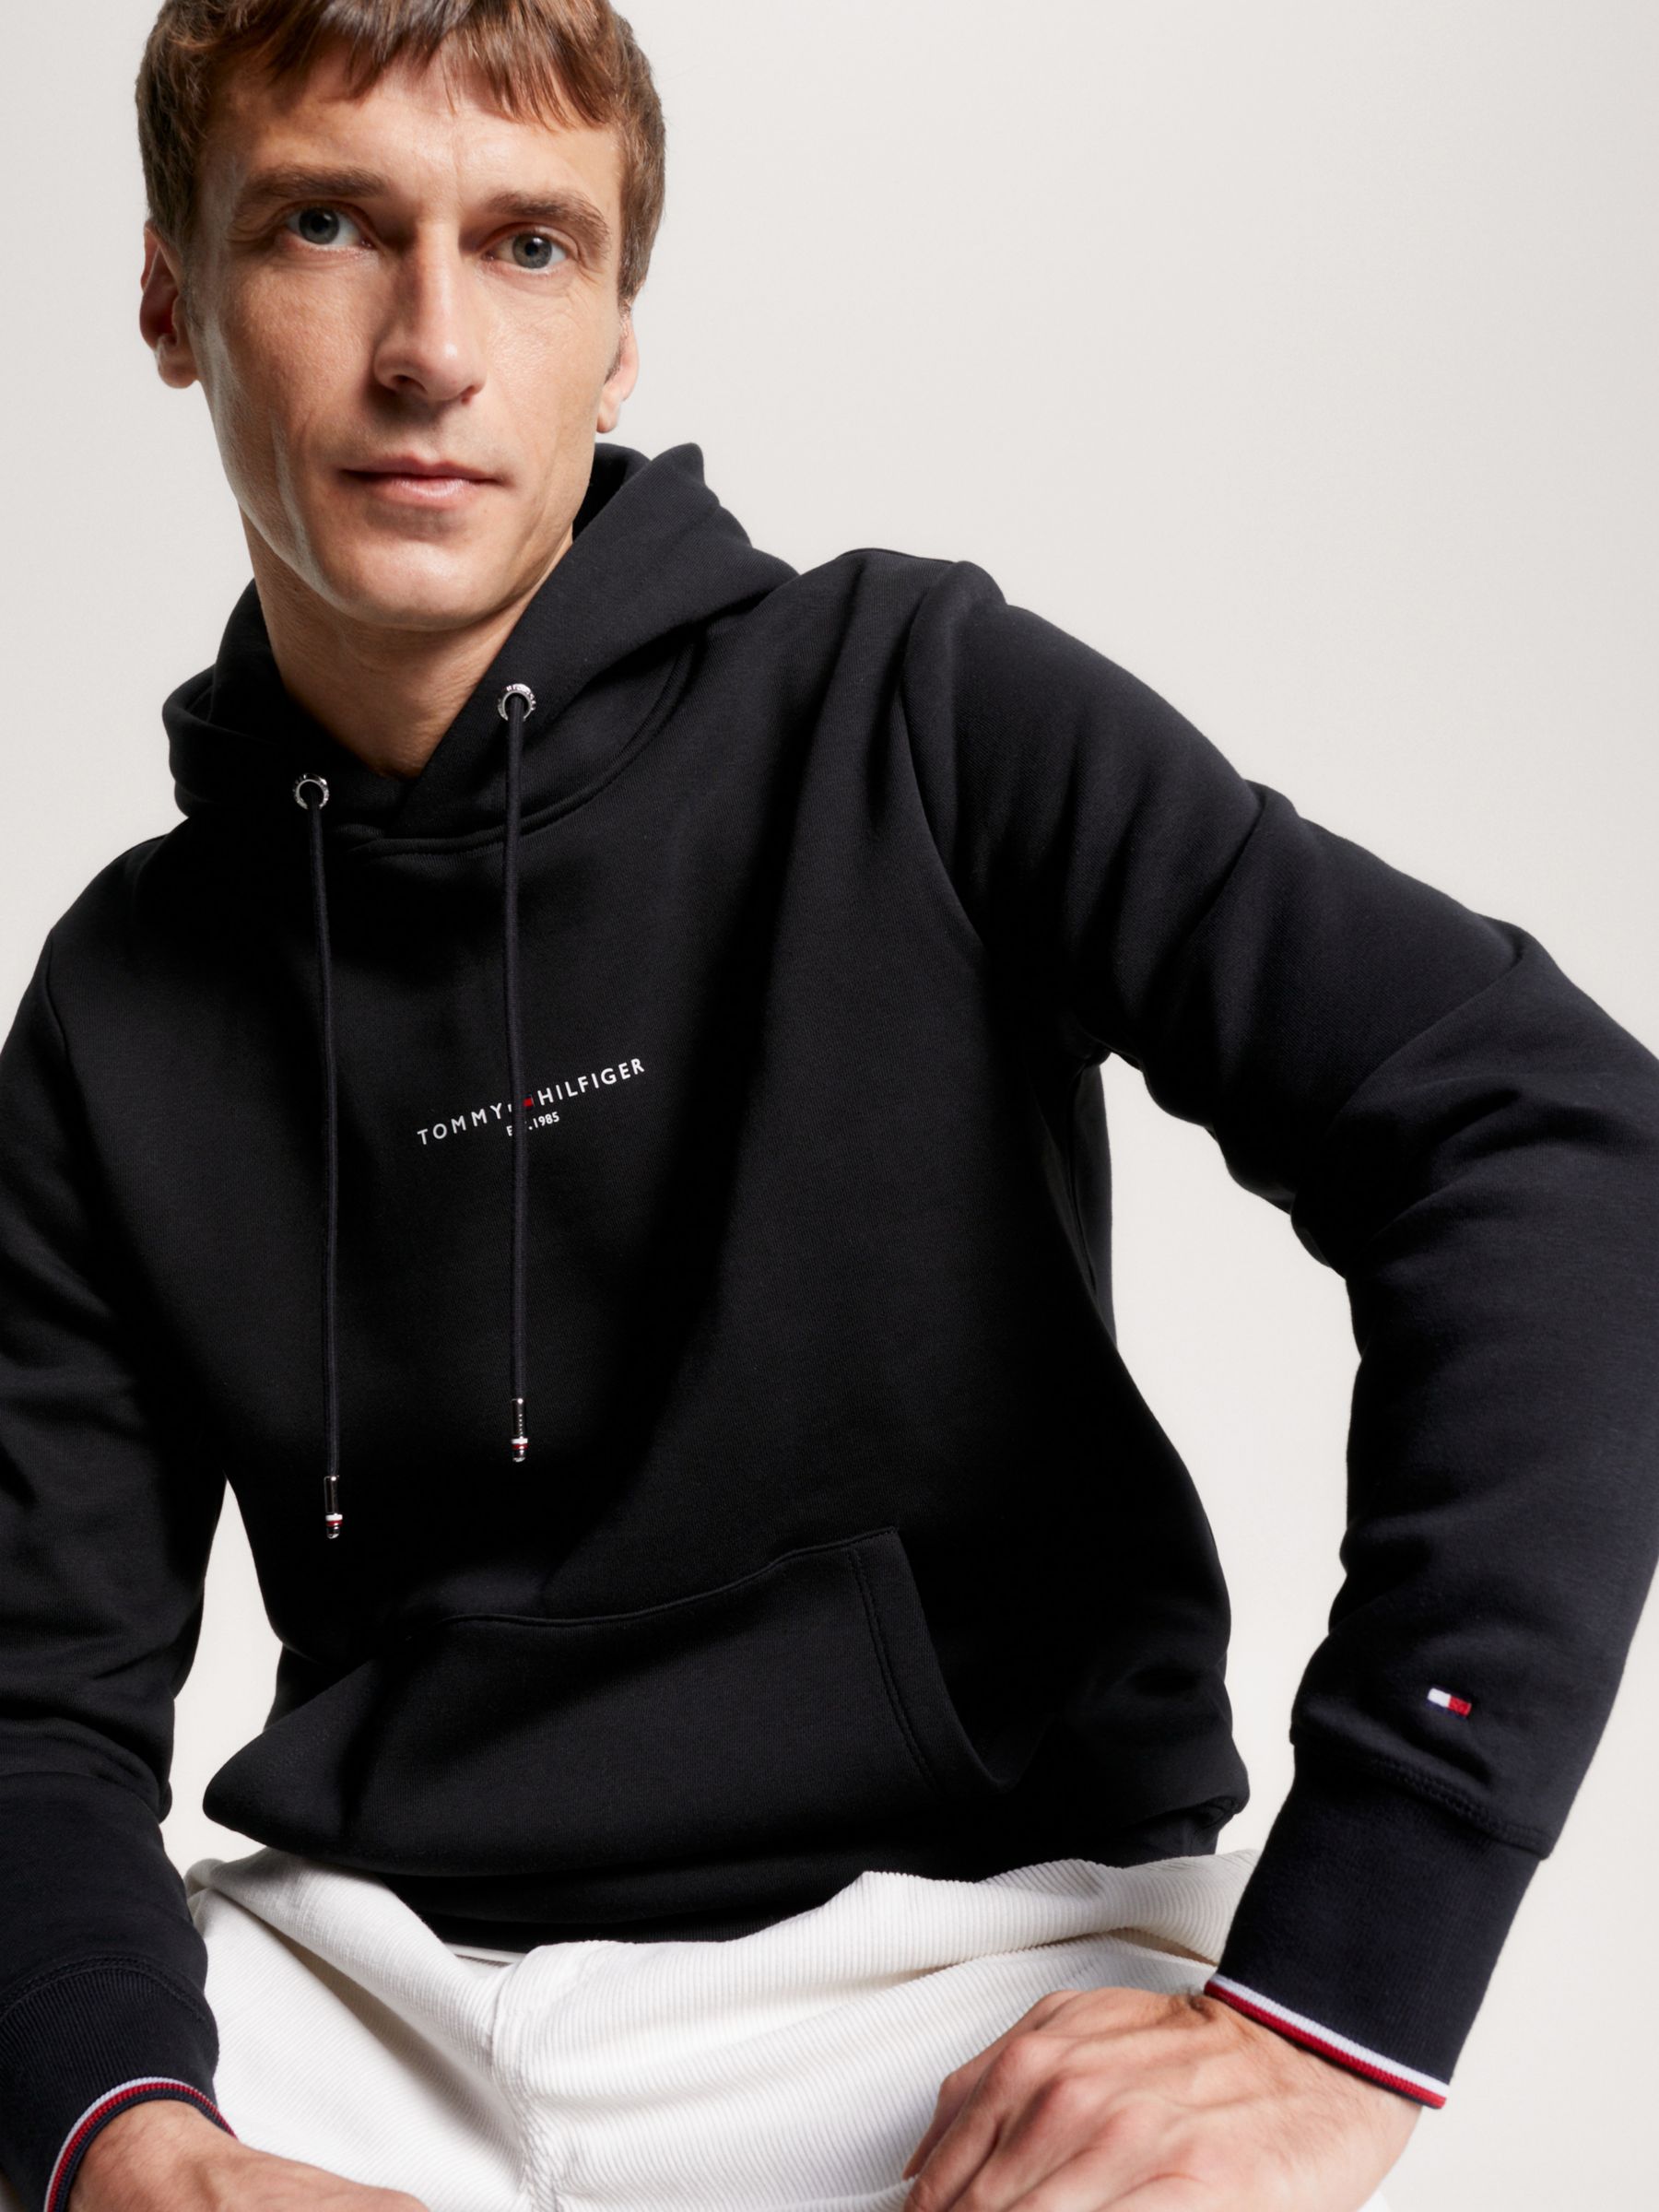 Buy Tommy Hilfiger Tommy Logo Tipped Hoody, Black Online at johnlewis.com